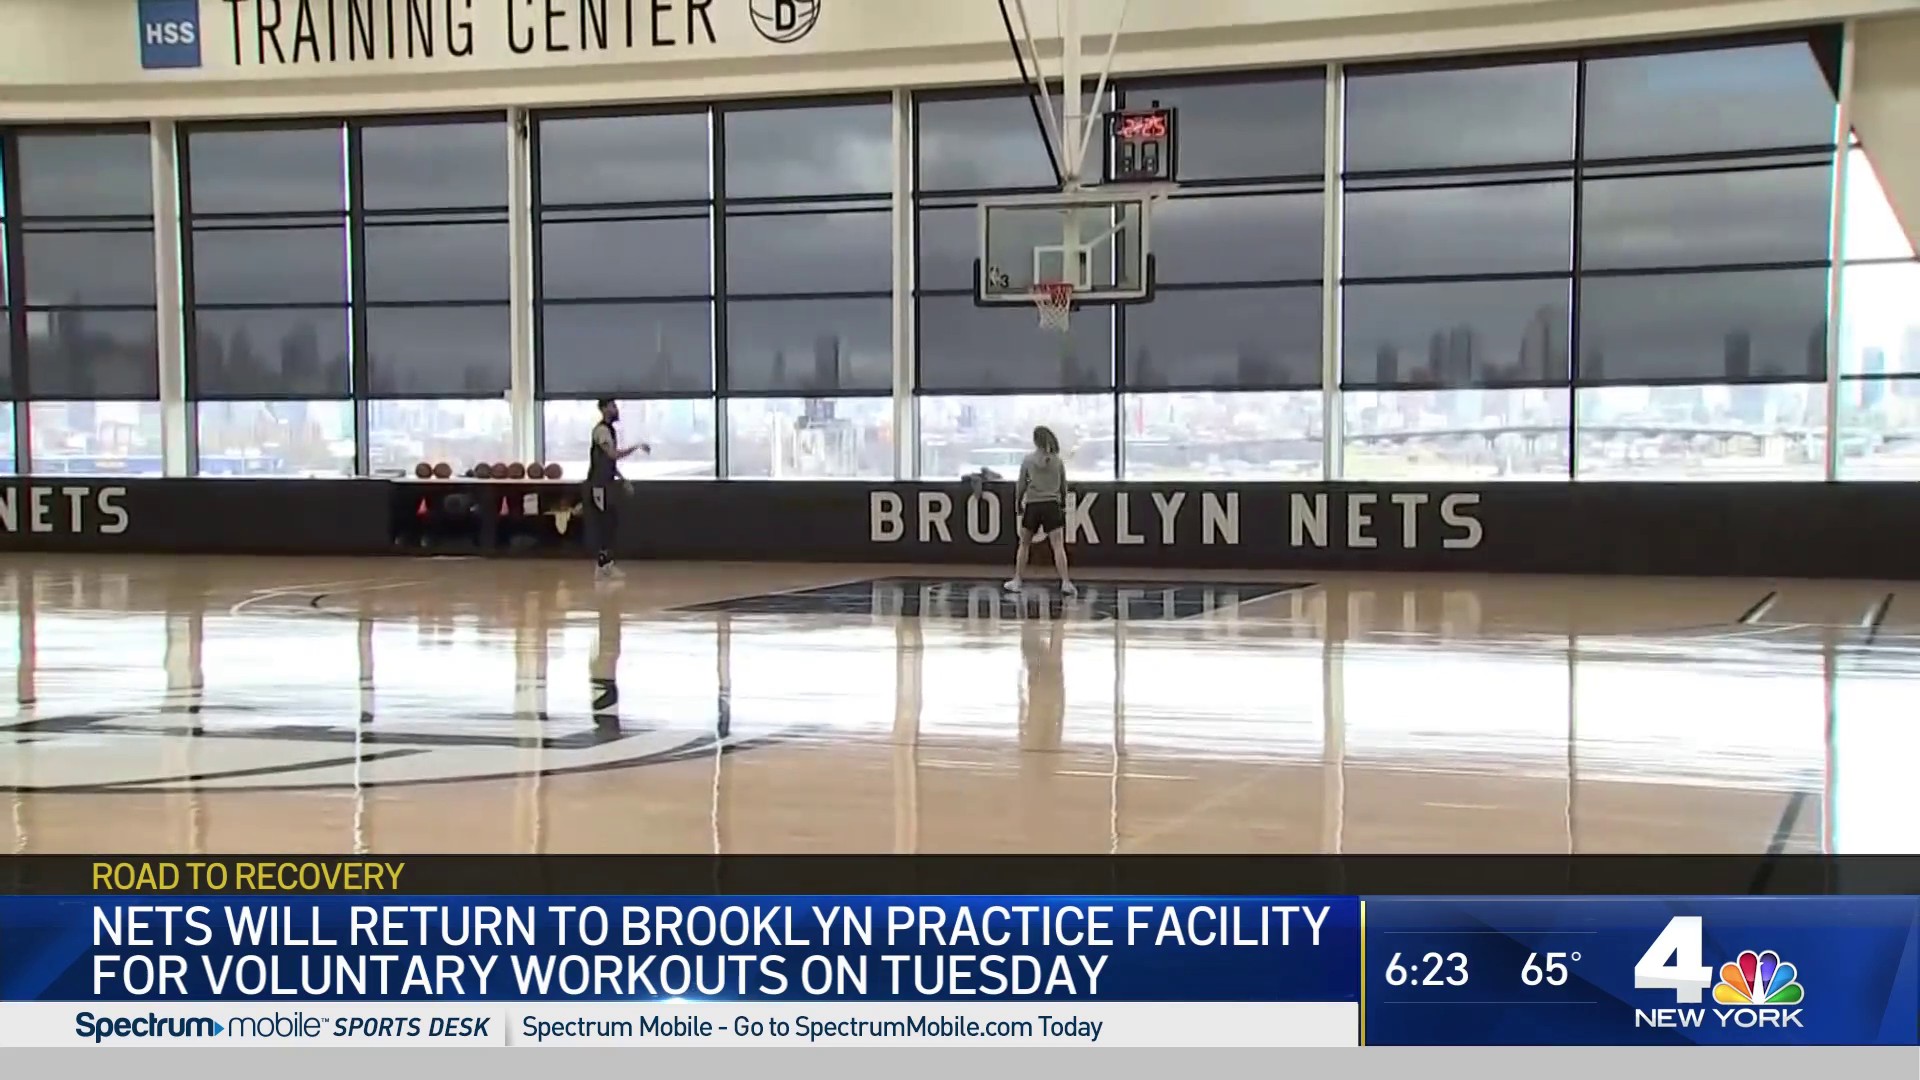 First Nets Practice at HSS Training Center